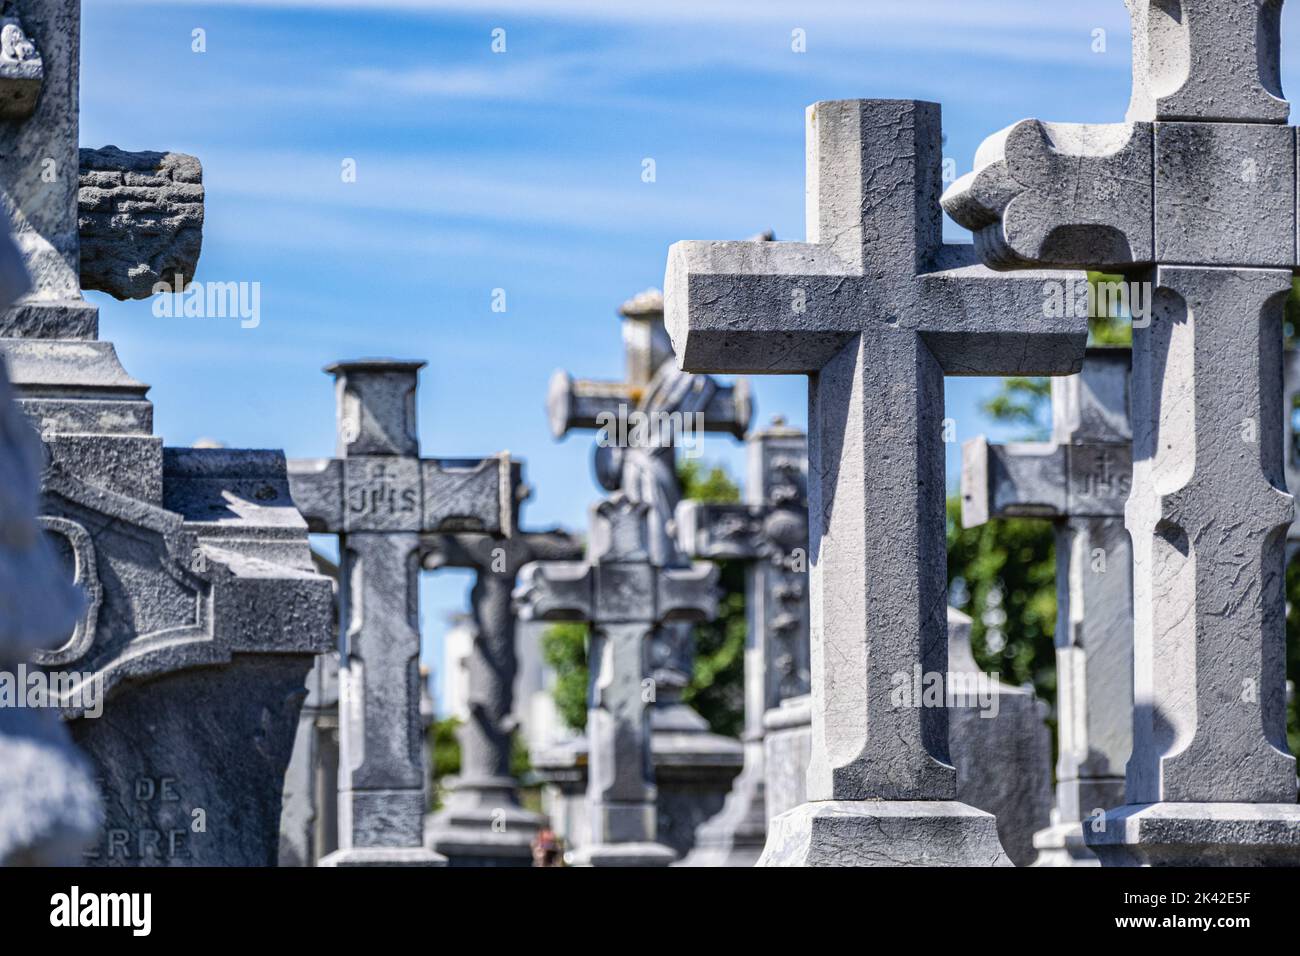 Tombstones and crosses at a french cemetery Stock Photo